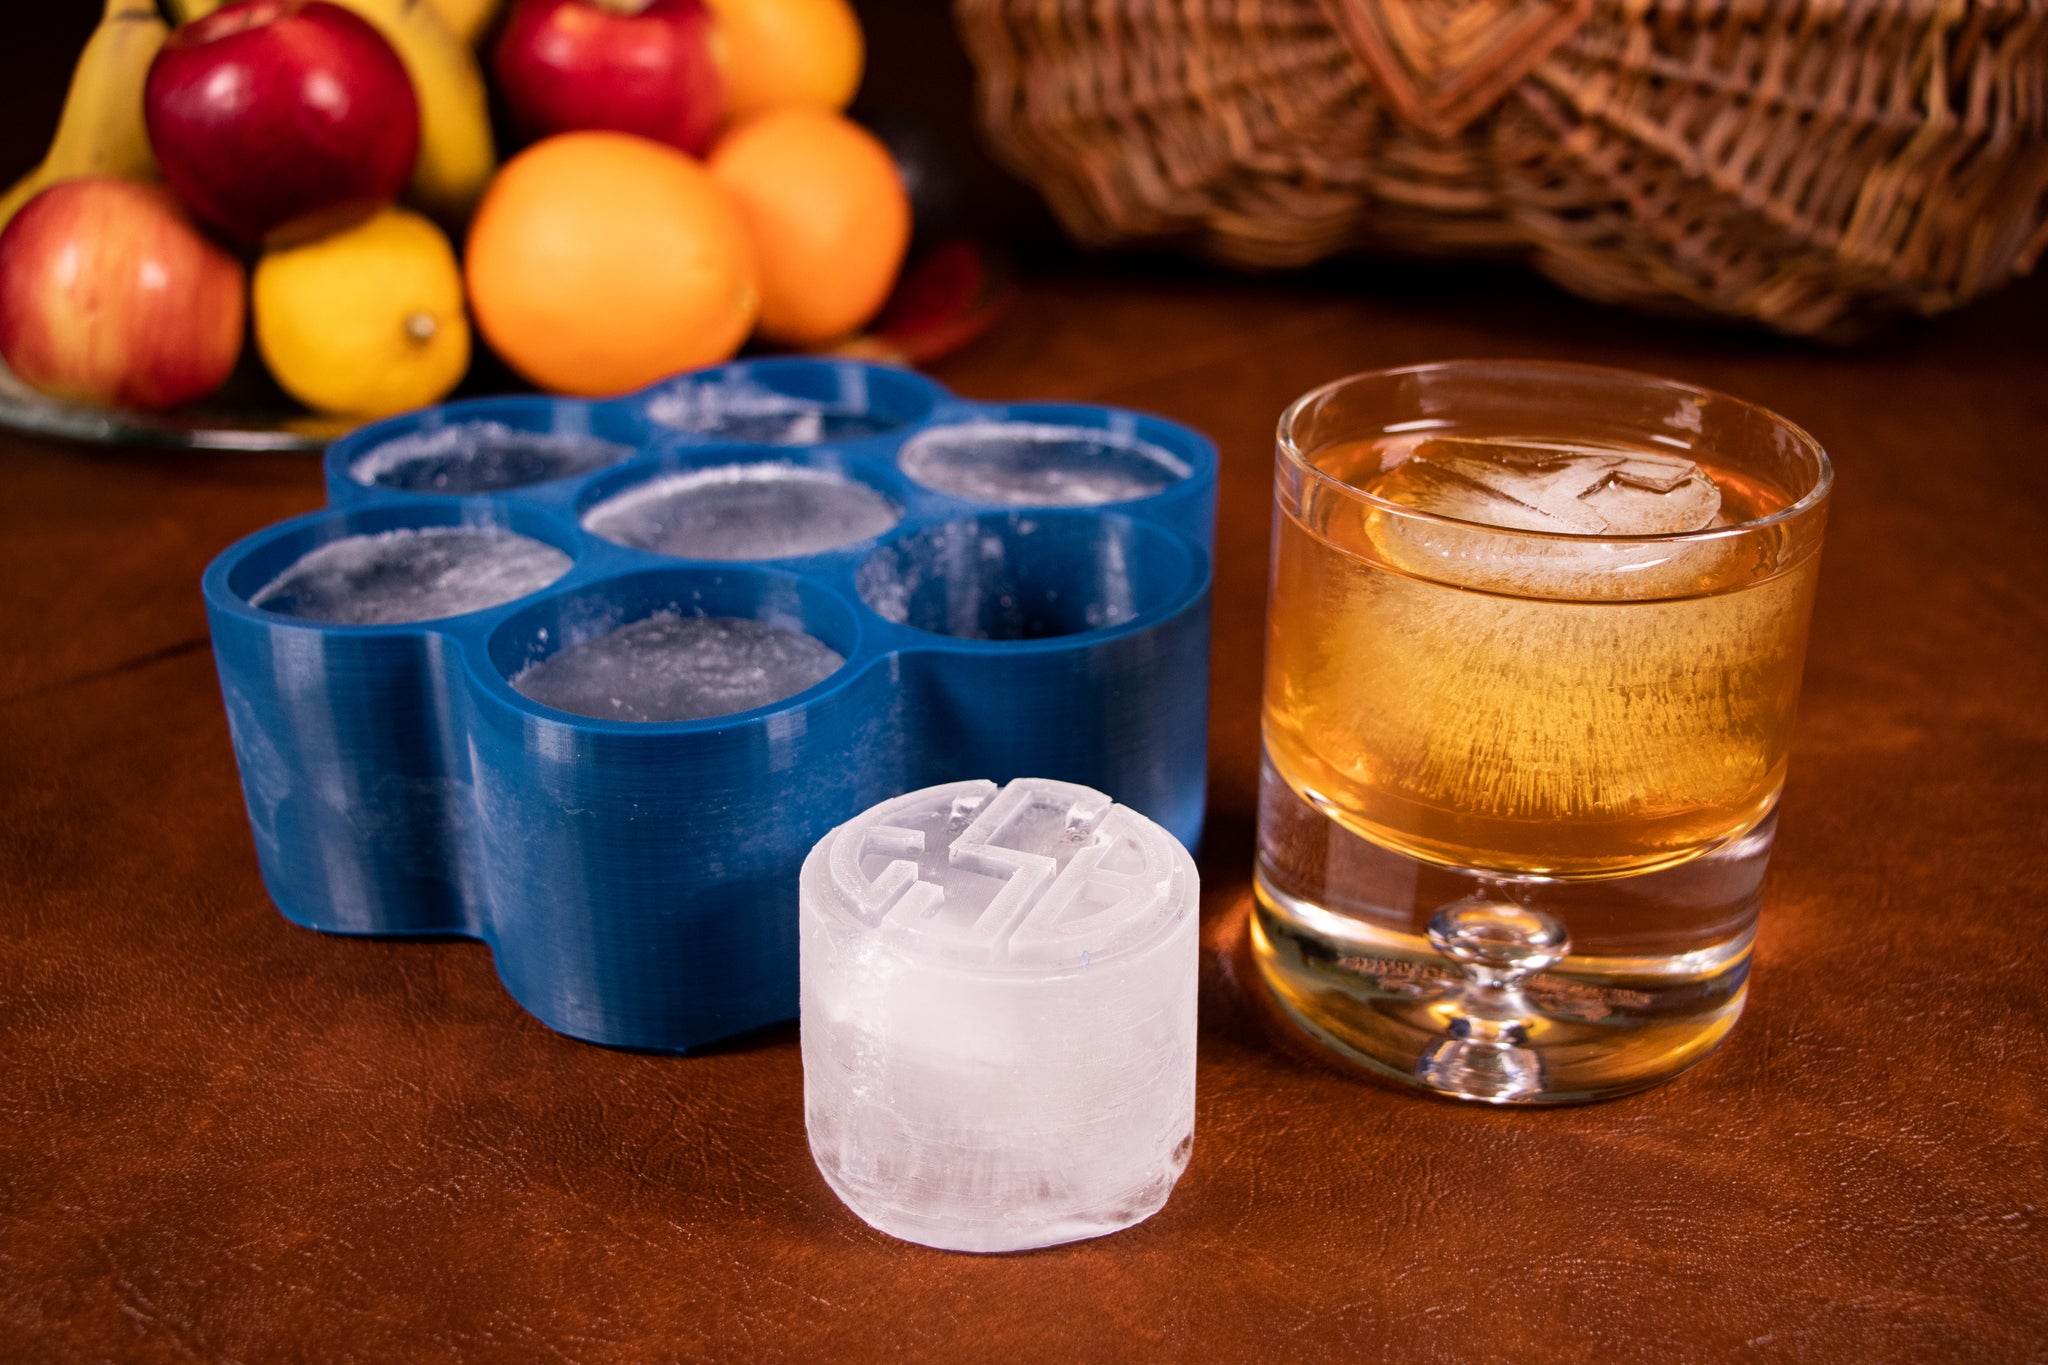  SILIGRAMS Customizable Bartender Whisky Ice Cube Mold - Personalized  Custom 2.3” Cocktail Ice Ball - Monogram Round Ice Mold - Design Your Own  Silicone Ice Stamp - Perfect Bourbon Ice Shot